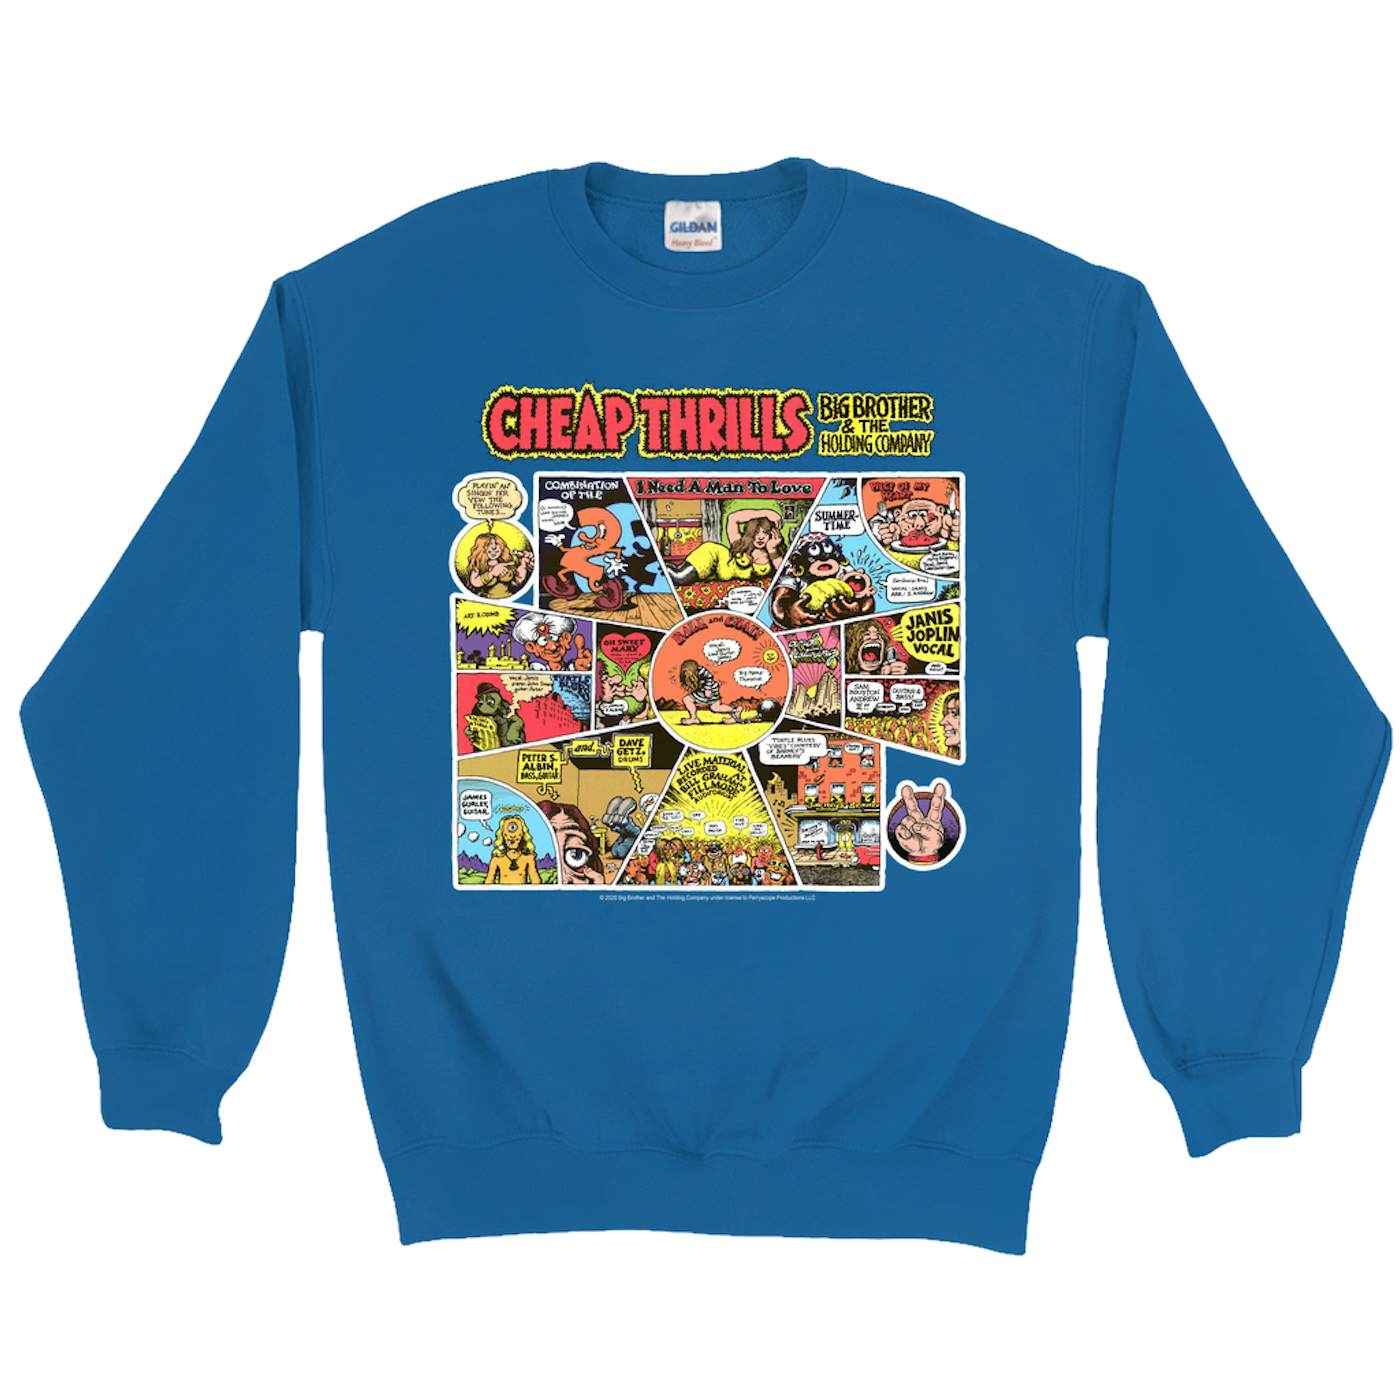 Big Brother & The Holding Company Sweatshirt | Cheap Thrills Album Cover Big Brother and The Holding Company Sweatshirt